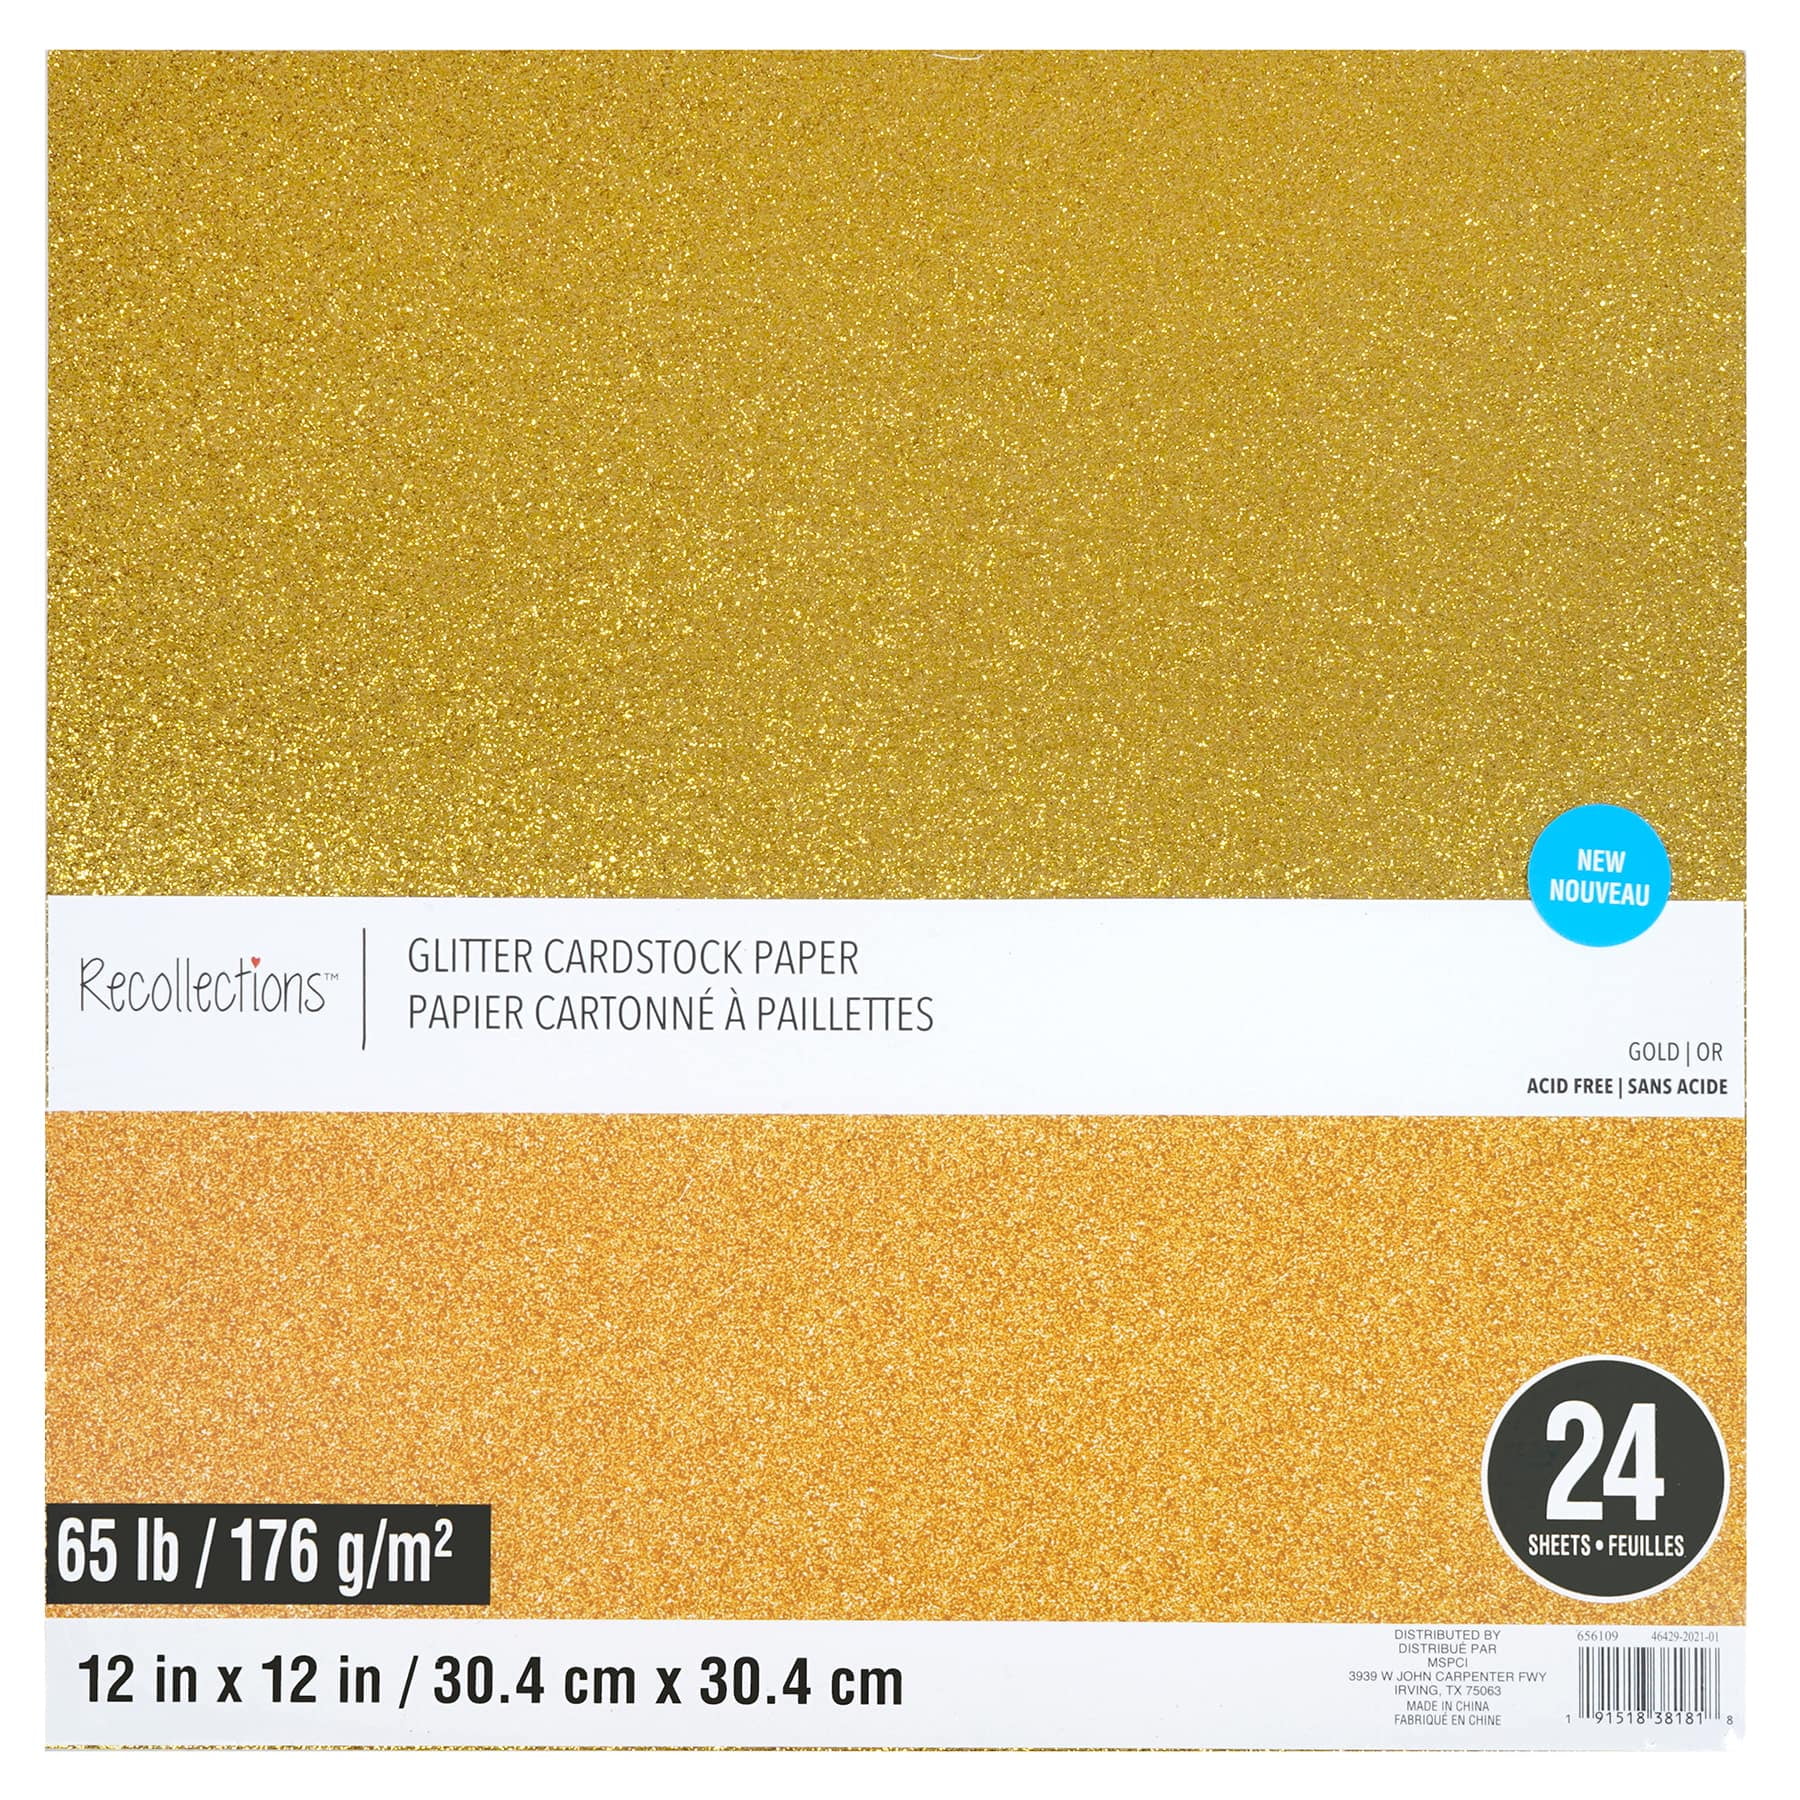 6 Packs: 24 ct. (144 total) Glitter 12 x 12 Cardstock Paper by  Recollections™ 